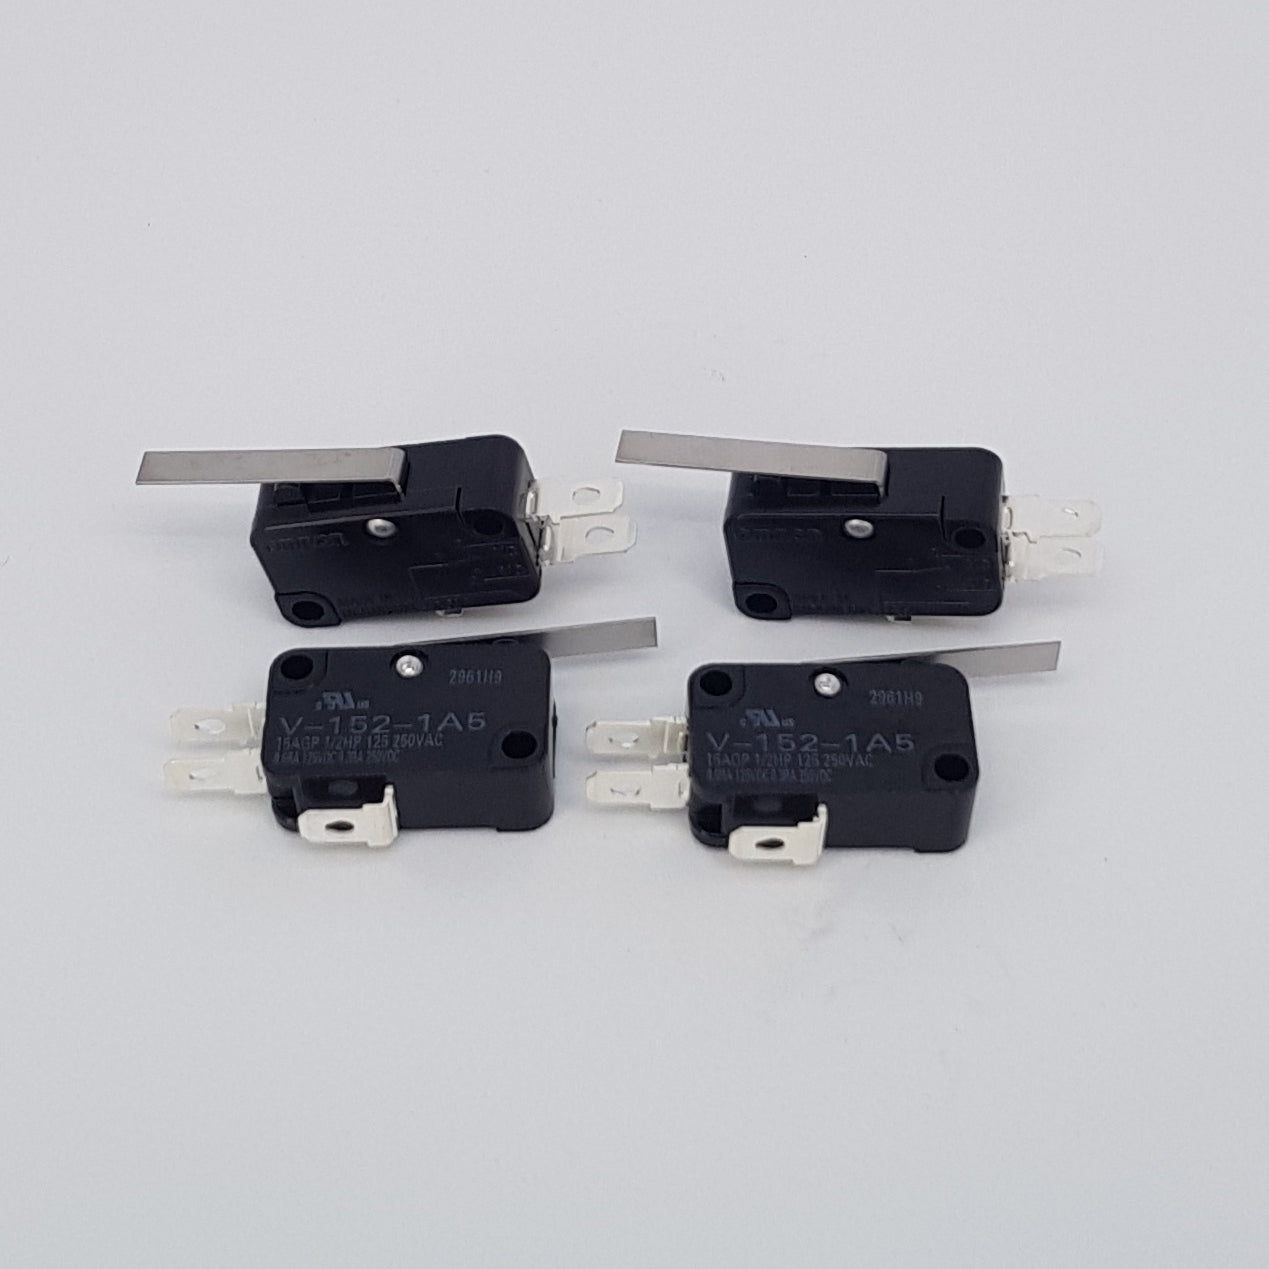 Omron V-152-1A5 microswitch pack (levered microswitch)